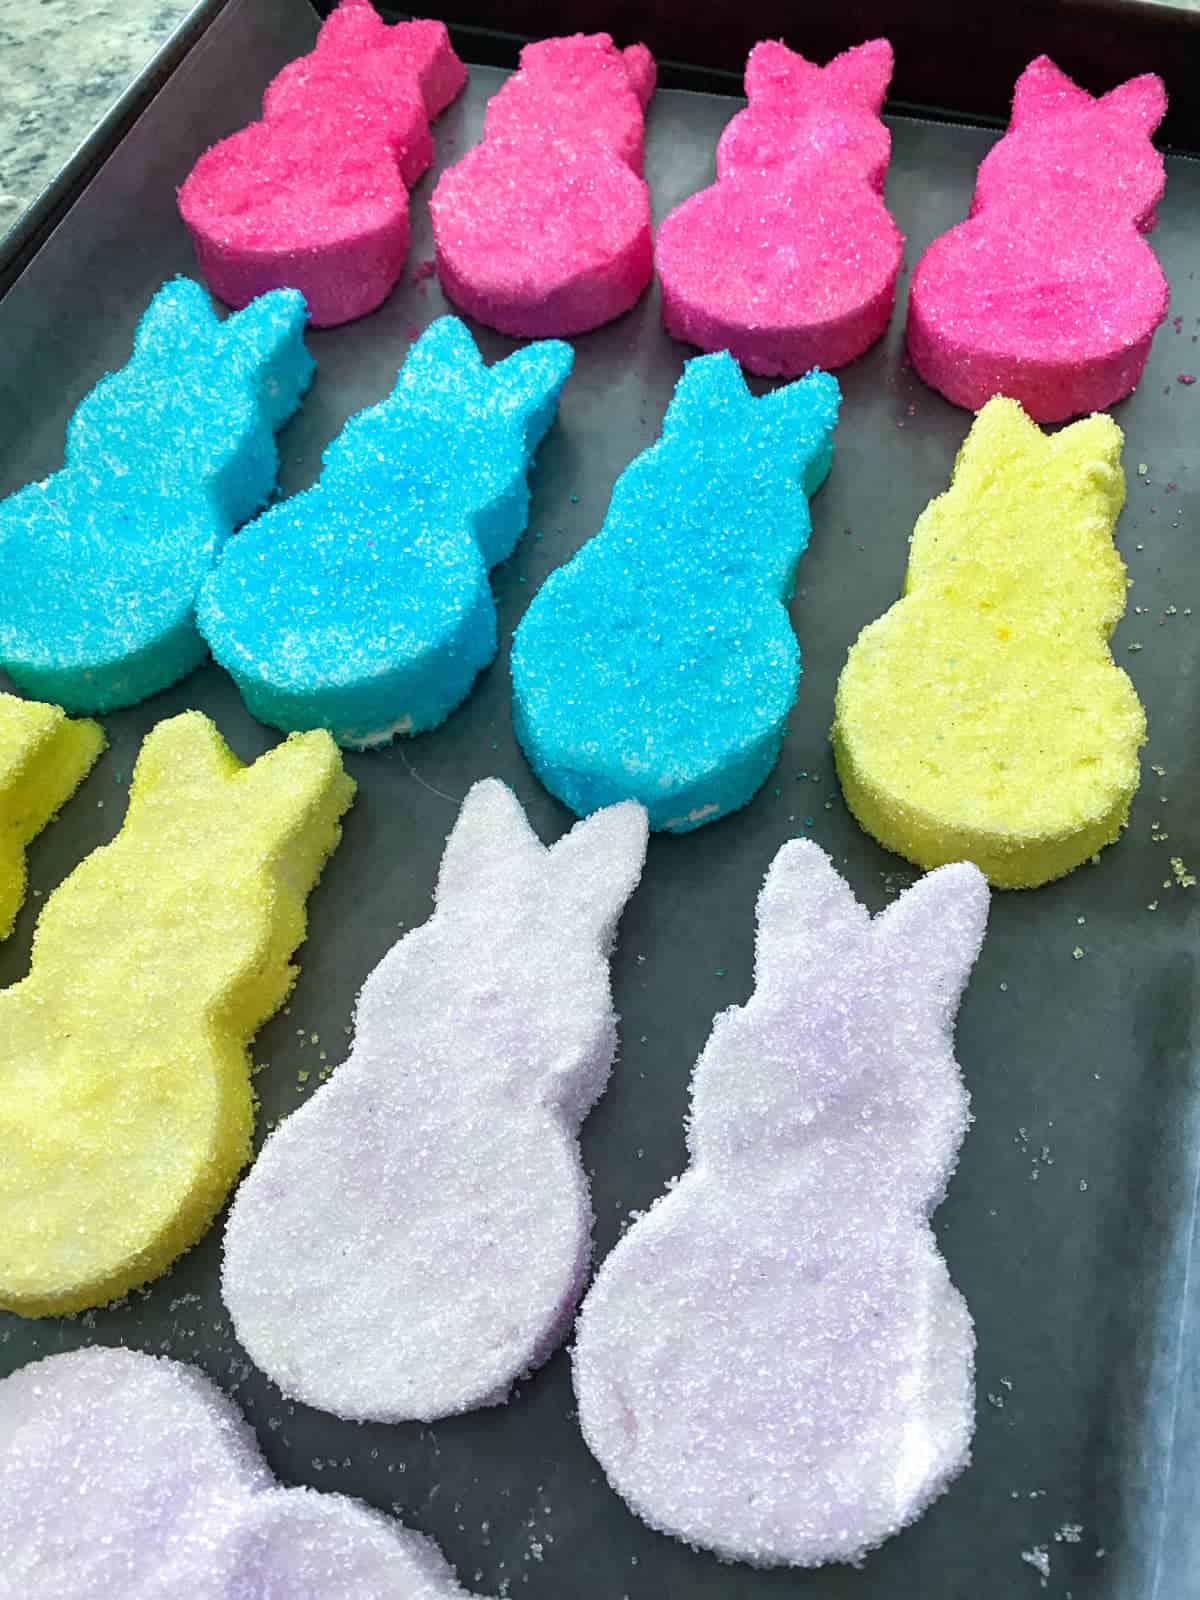 Homemade Peeps coated in pink, blue, yellow, and purple sugar on a baking sheet.